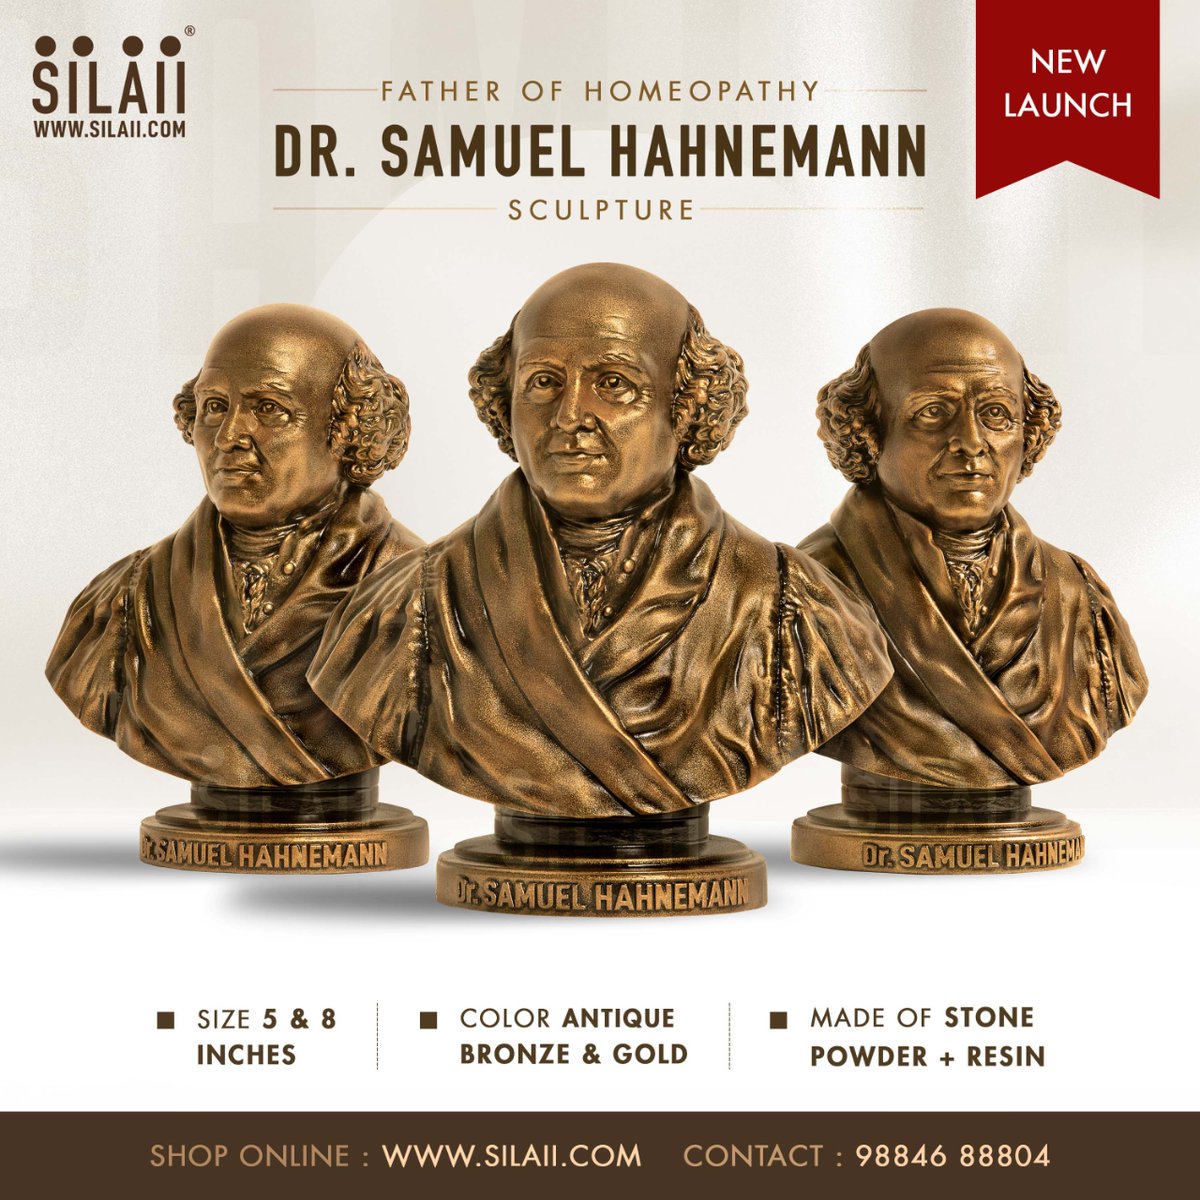 SILAII is proud to unveil the sculpture of Dr. Samuel Hahnemann - Father of Homeopathy. #SILAII #samuelhahnemann #homoeopathy #SILAIISculpture #fatherofhomeopathy #homeopathy #hahnemann #SculptureArt #Craftsmanship #SILAIIExcellence #Statue #HomeDecor #Artlovers #Gifting